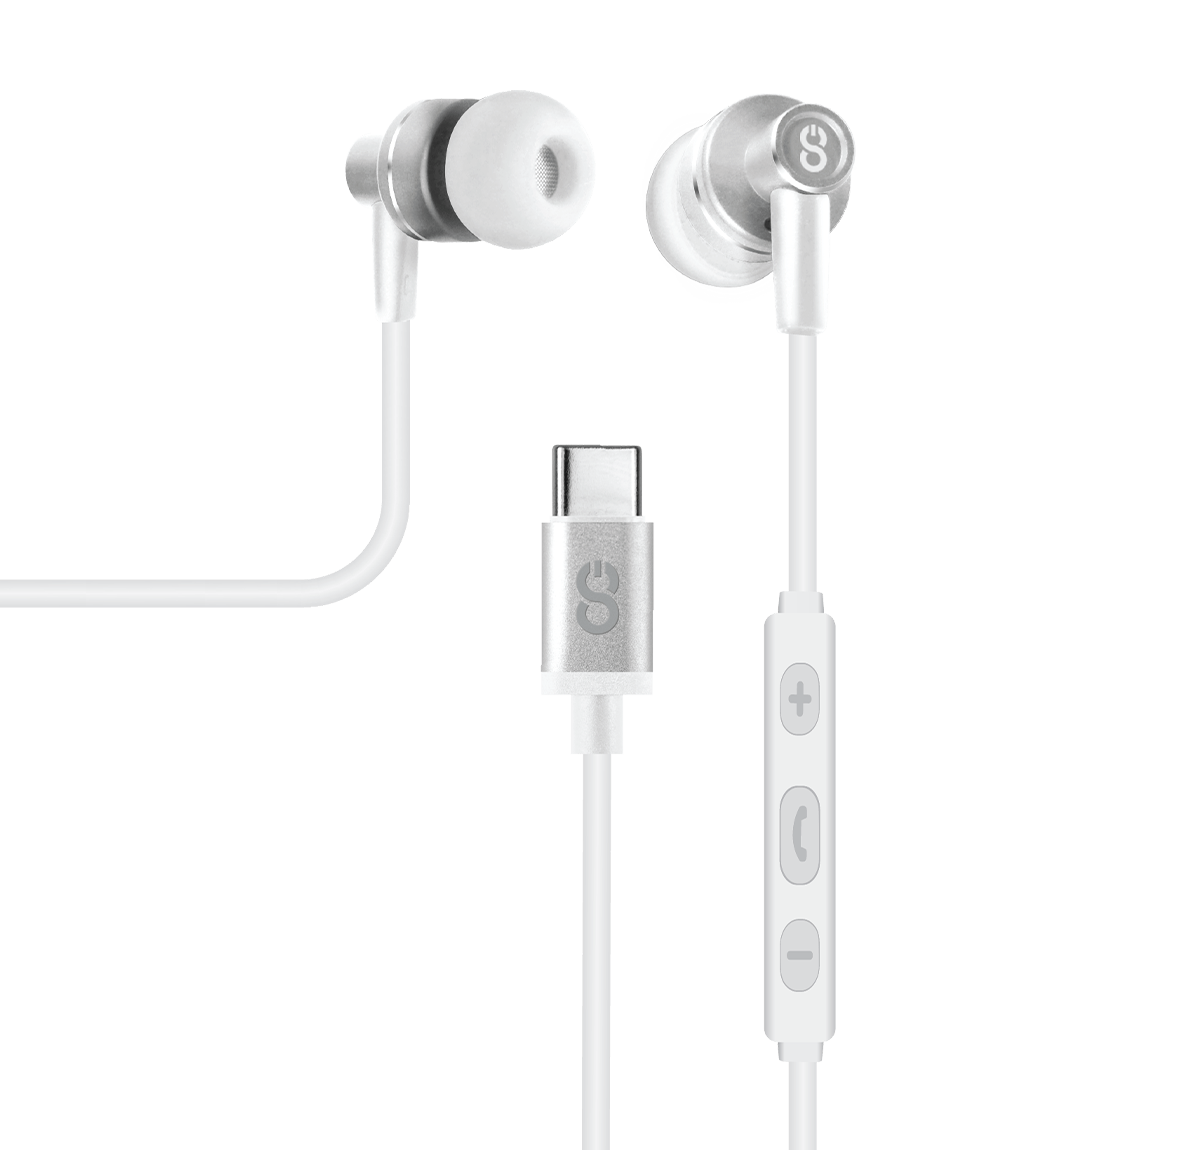 These are white and silver in-ear wired earbuds. USB-C earphones for Type C devices, headphones with mic and a connector for USB-C earbuds